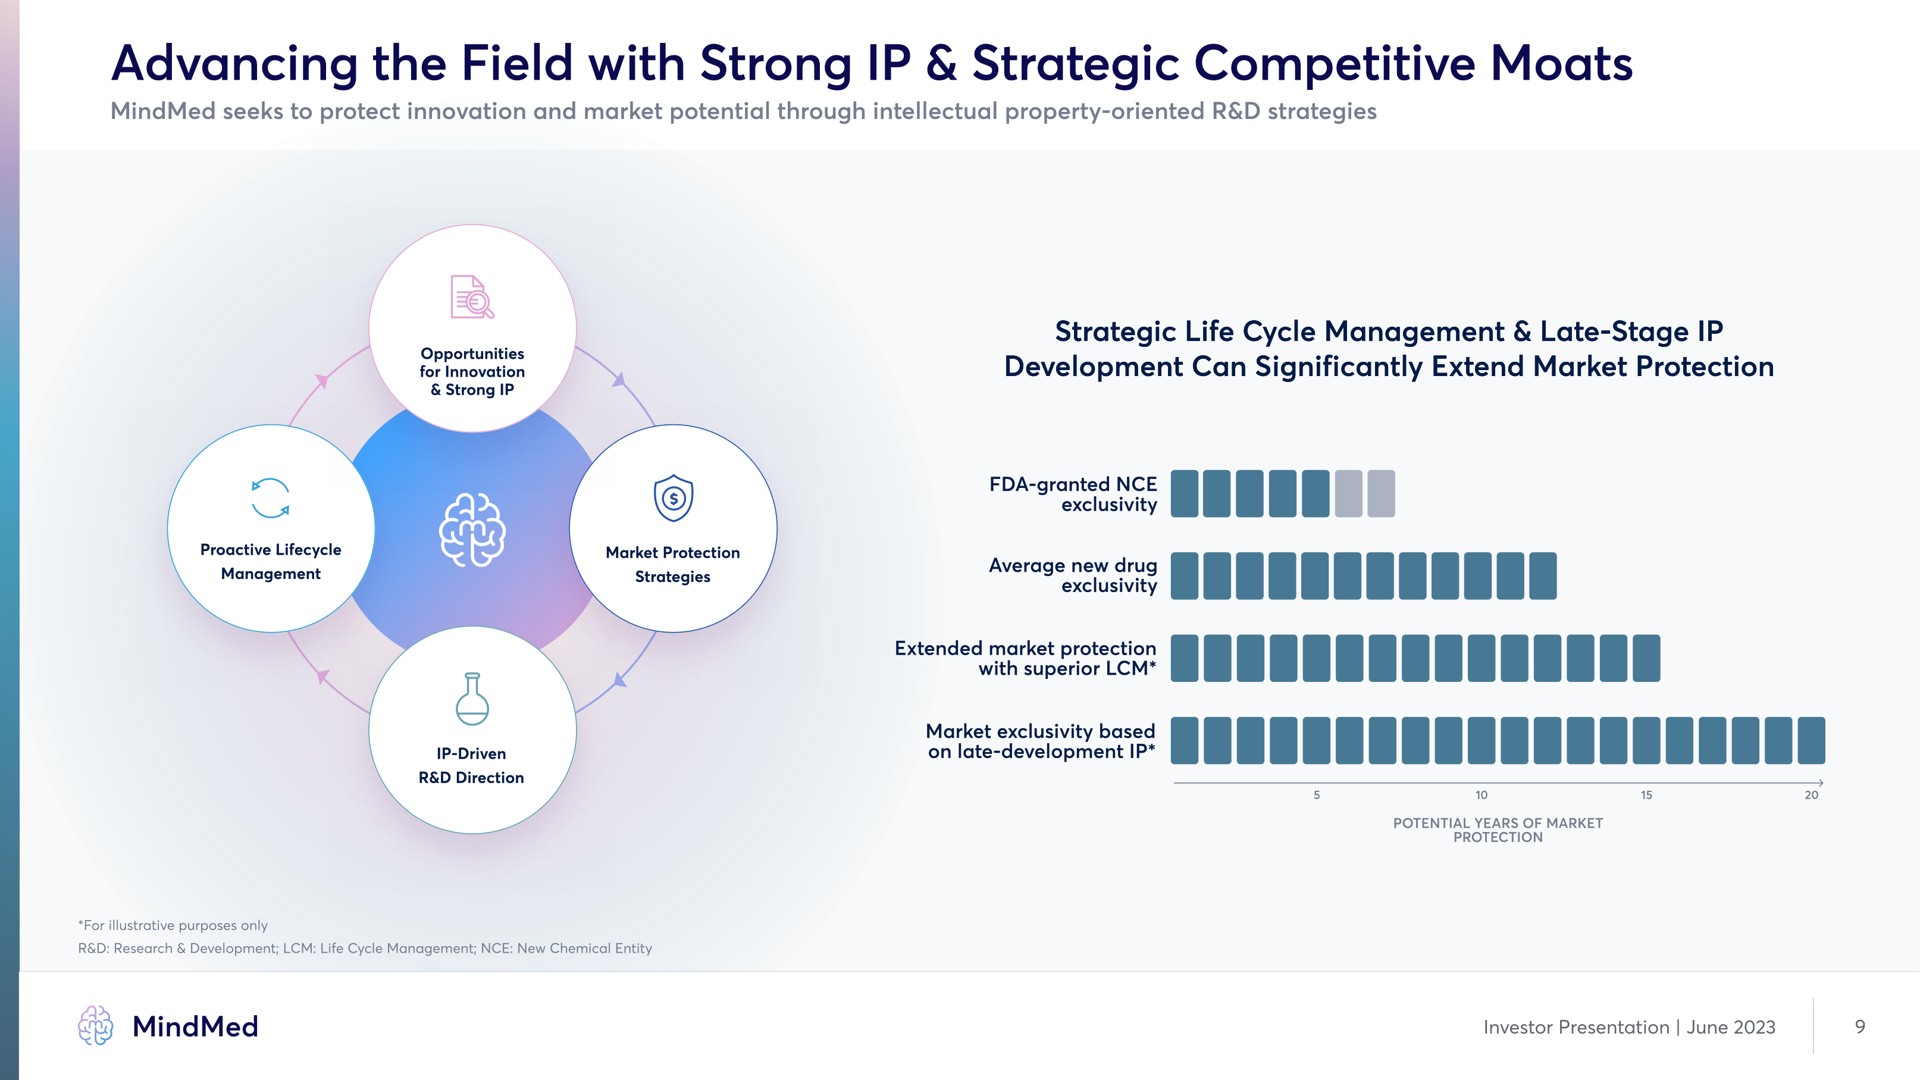 advancing the field with strong strategic competitive moats | MindMed